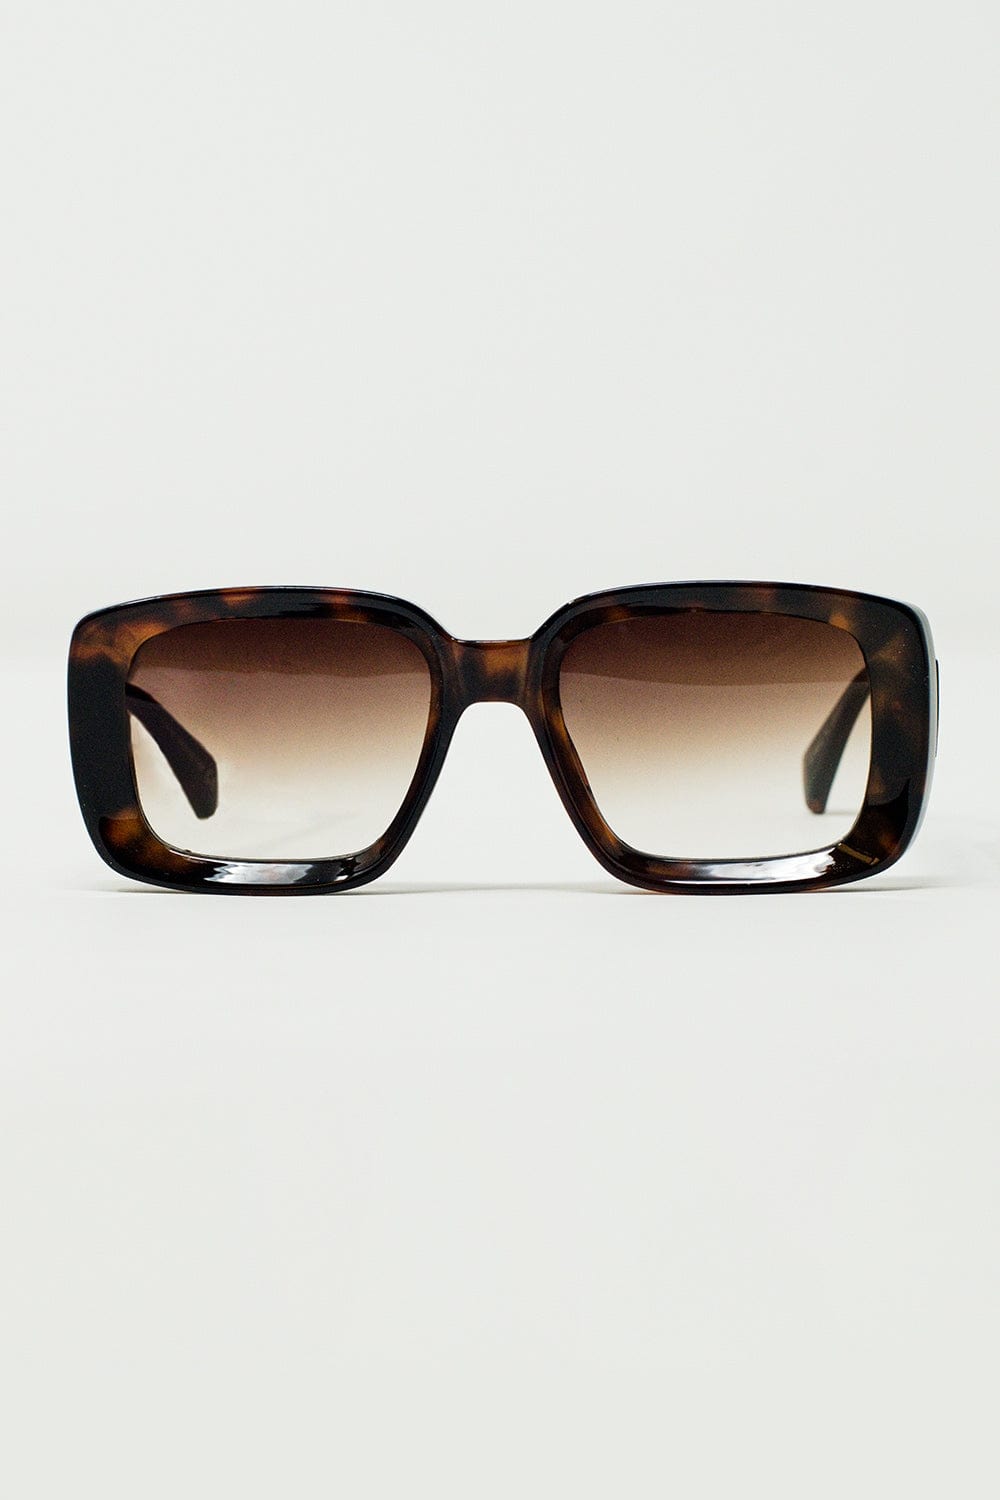 Q2 Women's Sunglasses One Size / Brown Oversized Rectangular Sunglasses With Wide Frame In Brown